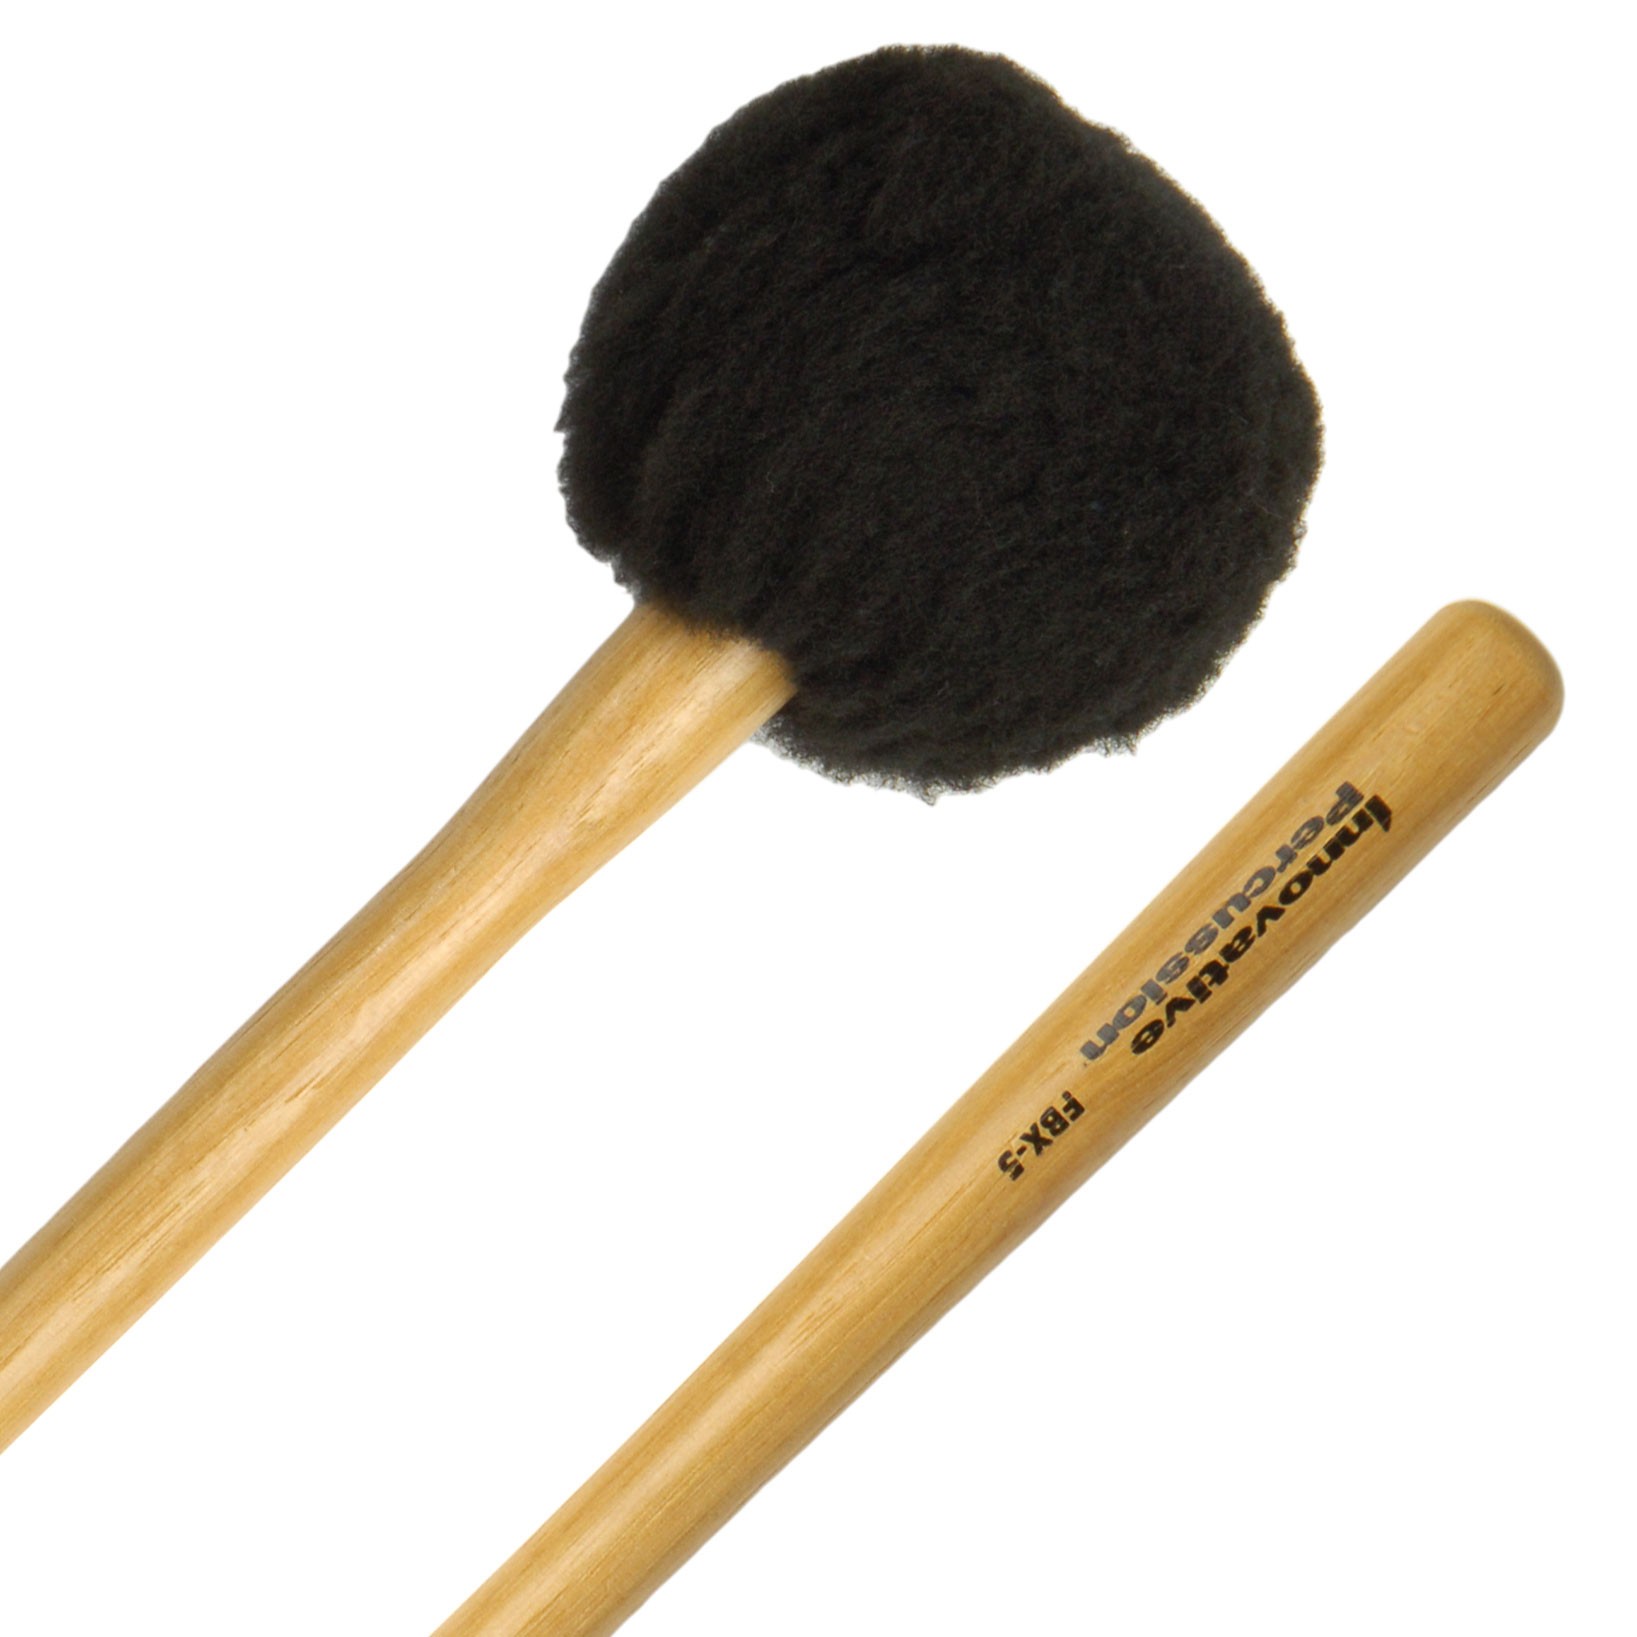 Innovative Percussion FBX-5S Field SeriesExtra Large Soft Bass Drum Mallets